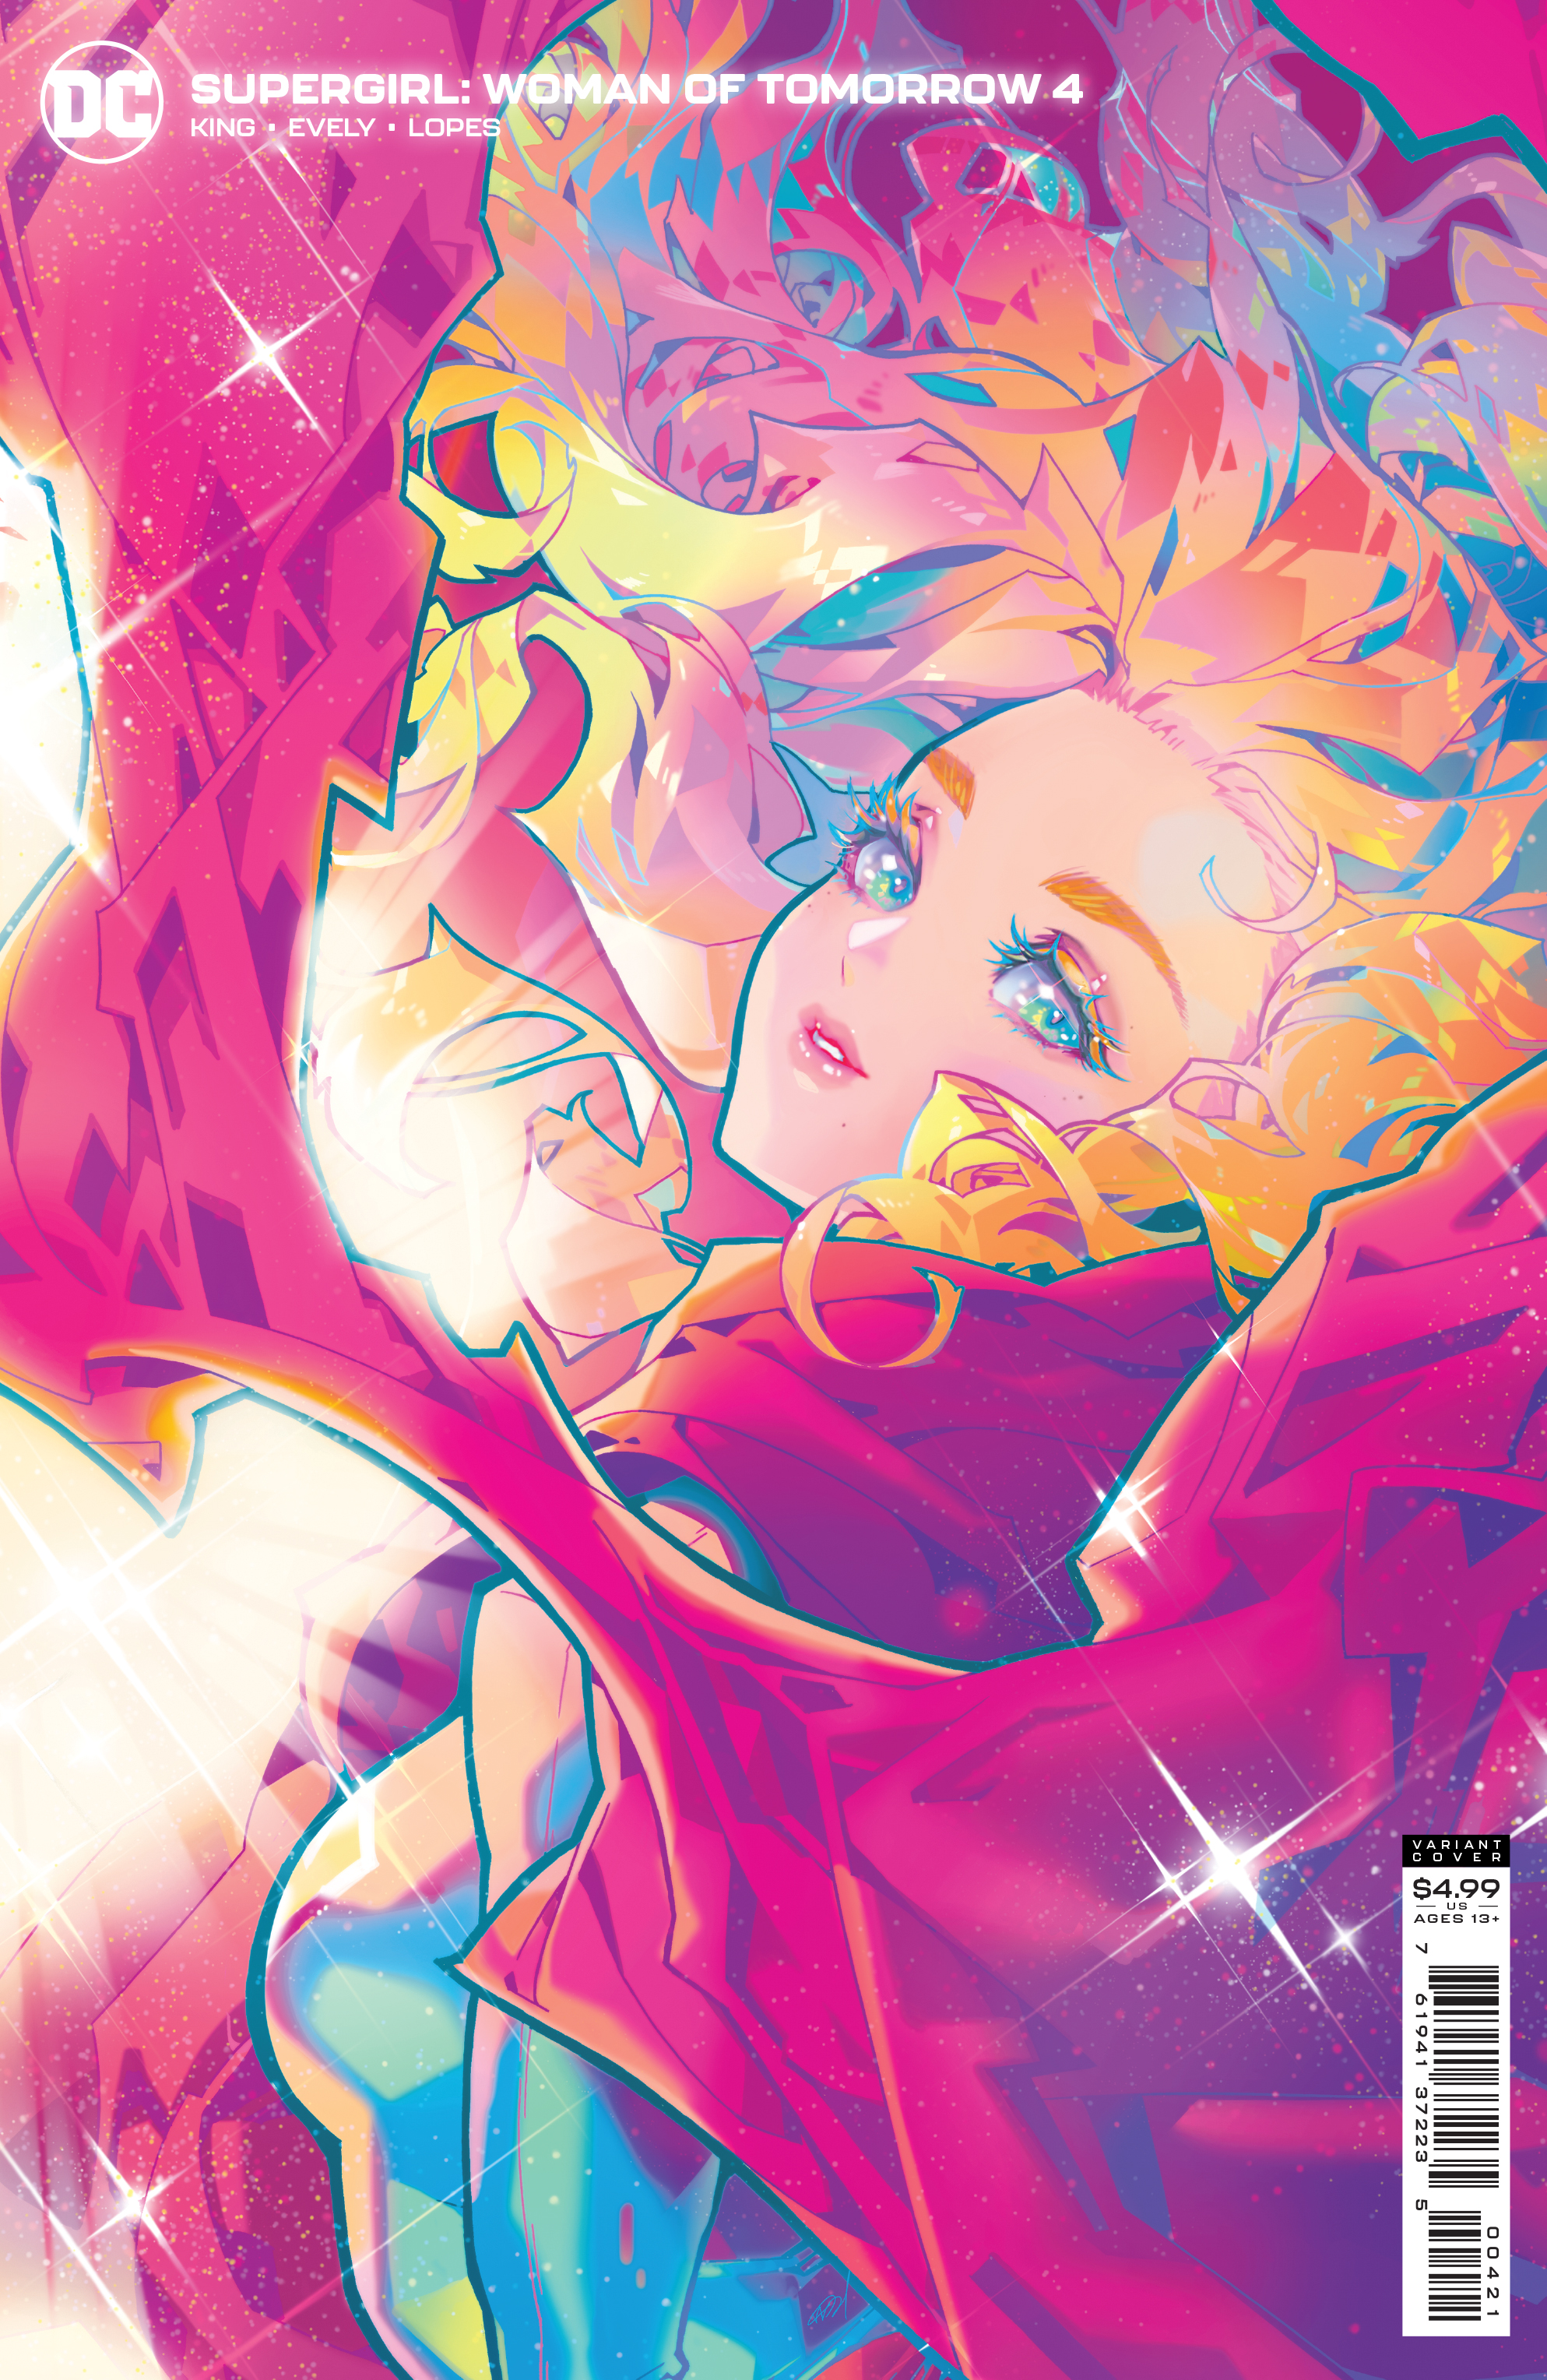 Supergirl Woman of Tomorrow #4 Cover B Rose Besch Variant (Of 8)